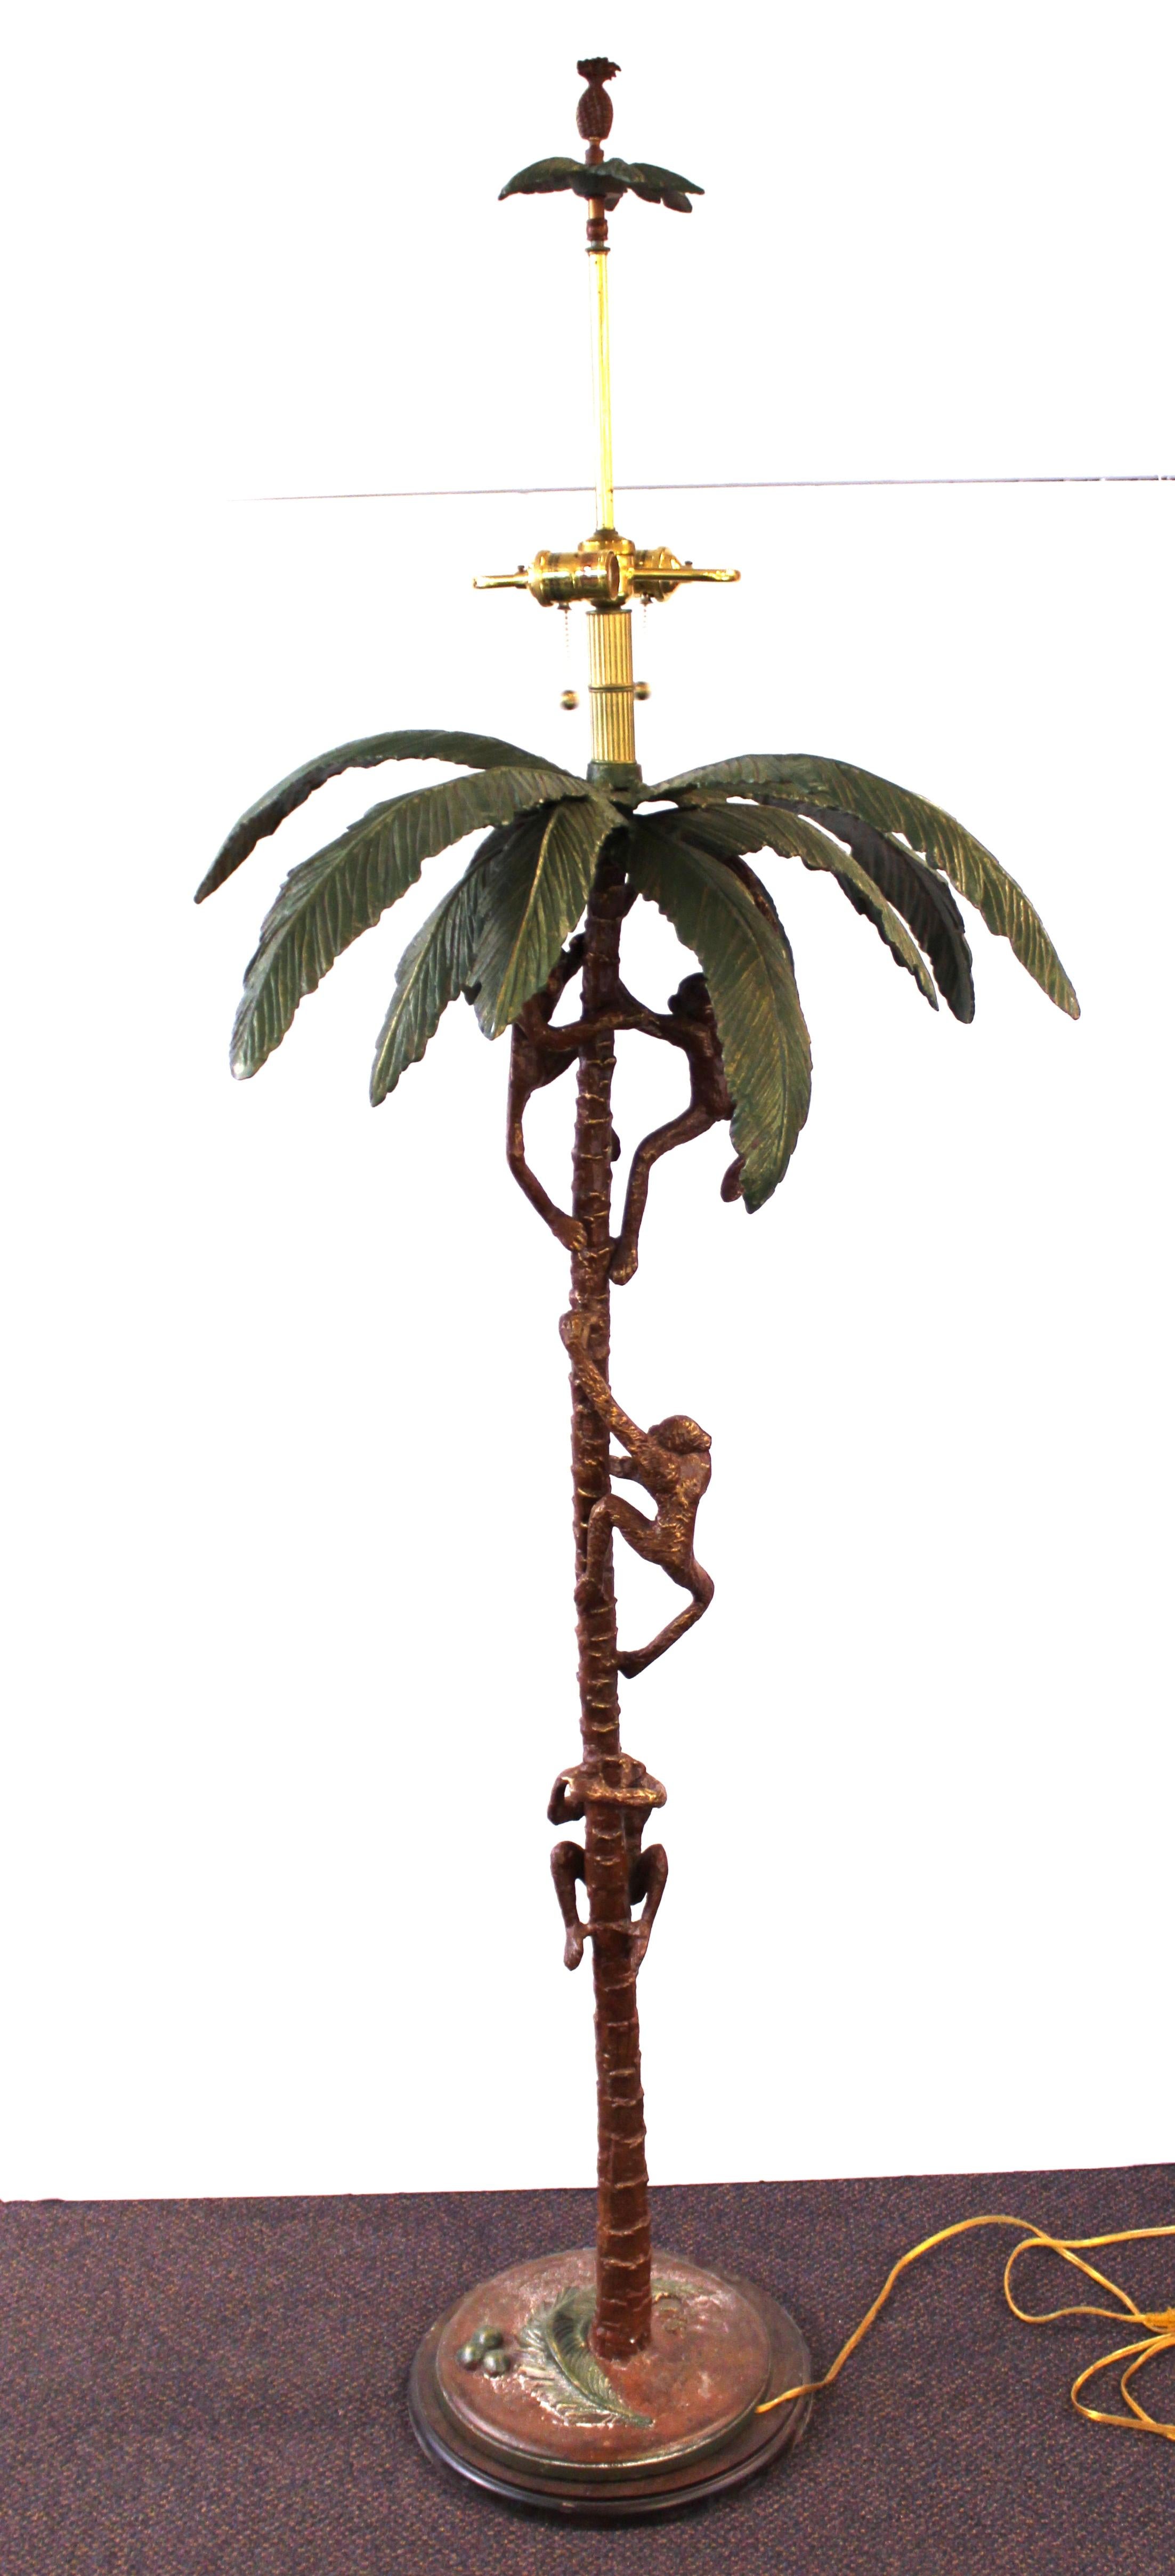 Hollywood Regency floor lamp in metal shaped like a palm tree with monkeys climbing up to grab coconuts. The piece was designed by Frederick Cooper and has a label on the light sockets. A pineapple finial tops of the lamp. In great vintage condition.